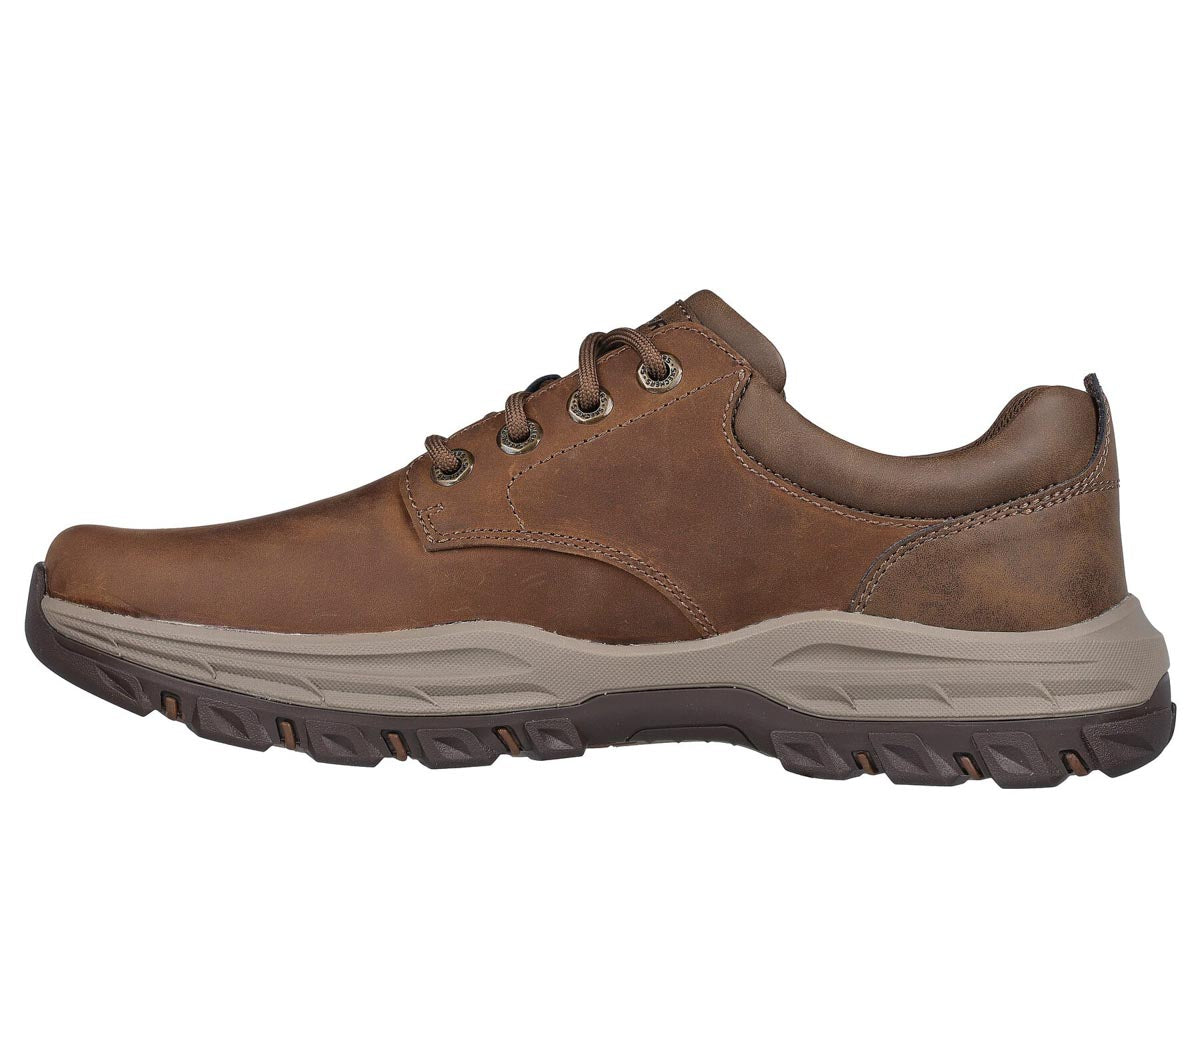 Lifestyle image of Skechers Knowlson - Leland shoes being worn outdoors.